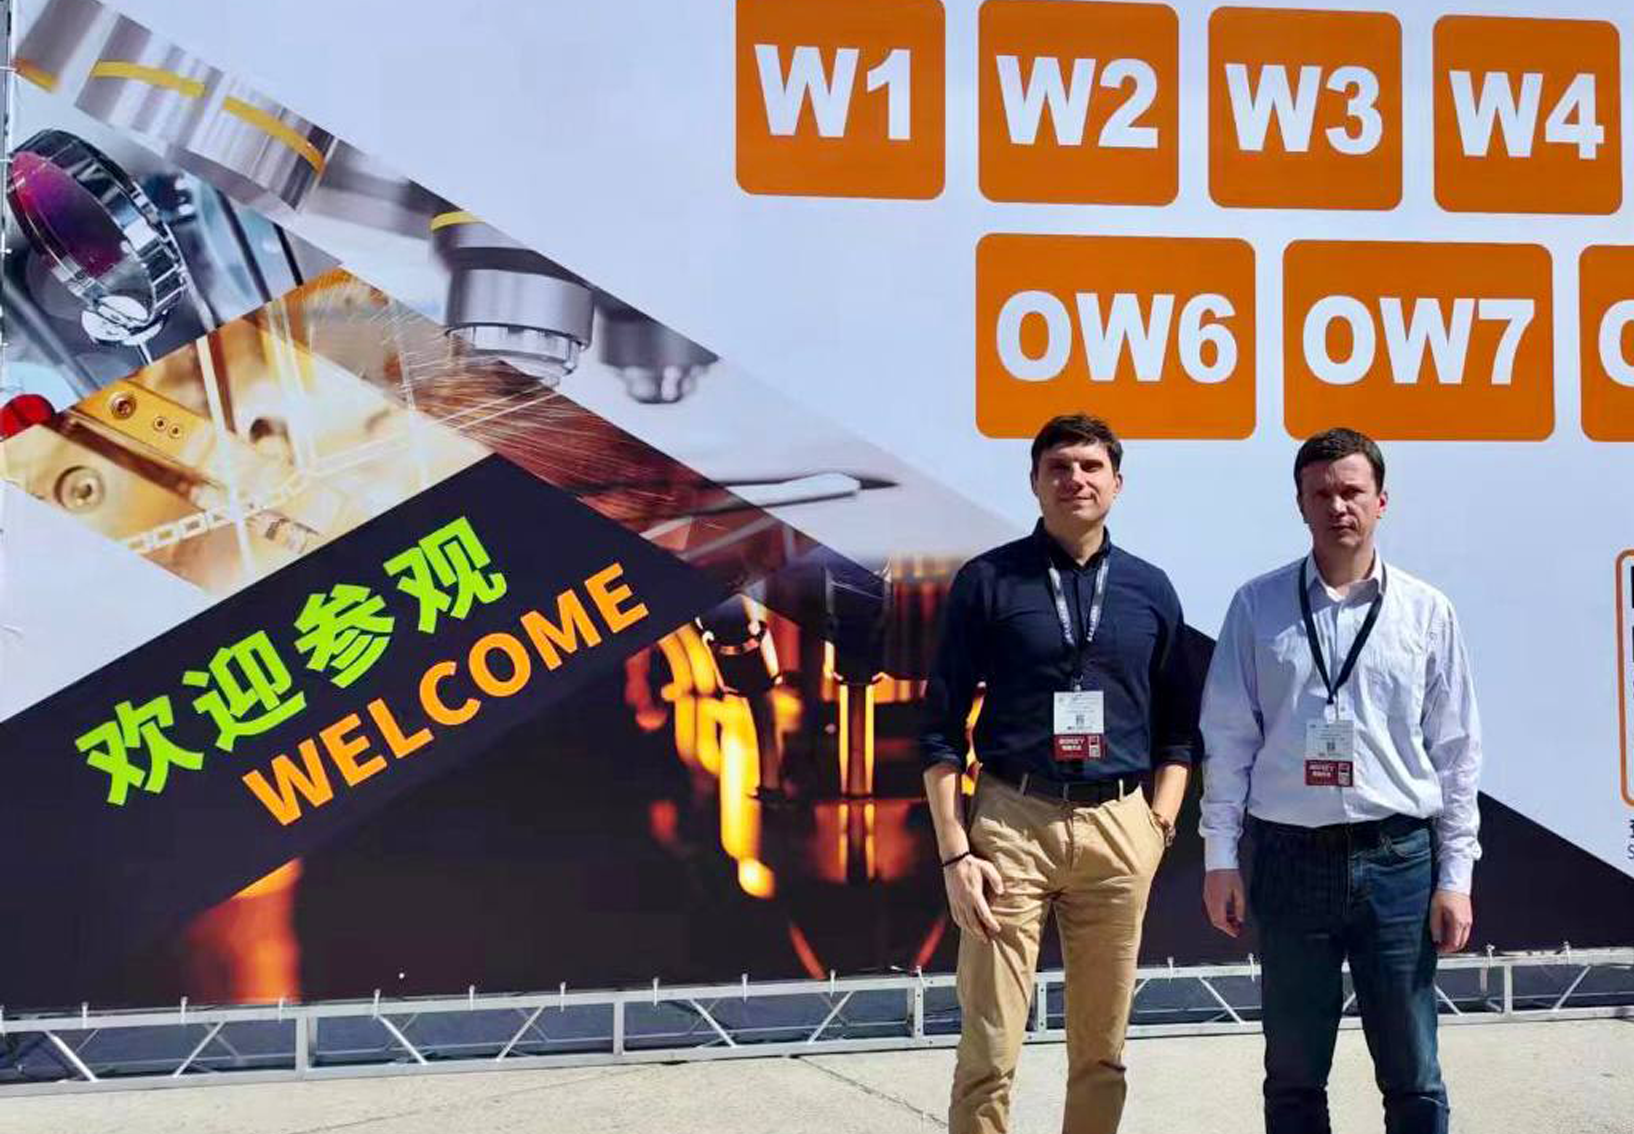 Egor Gurski and Pavel Korolev are currently attending the LASER World of PHOTONICS China